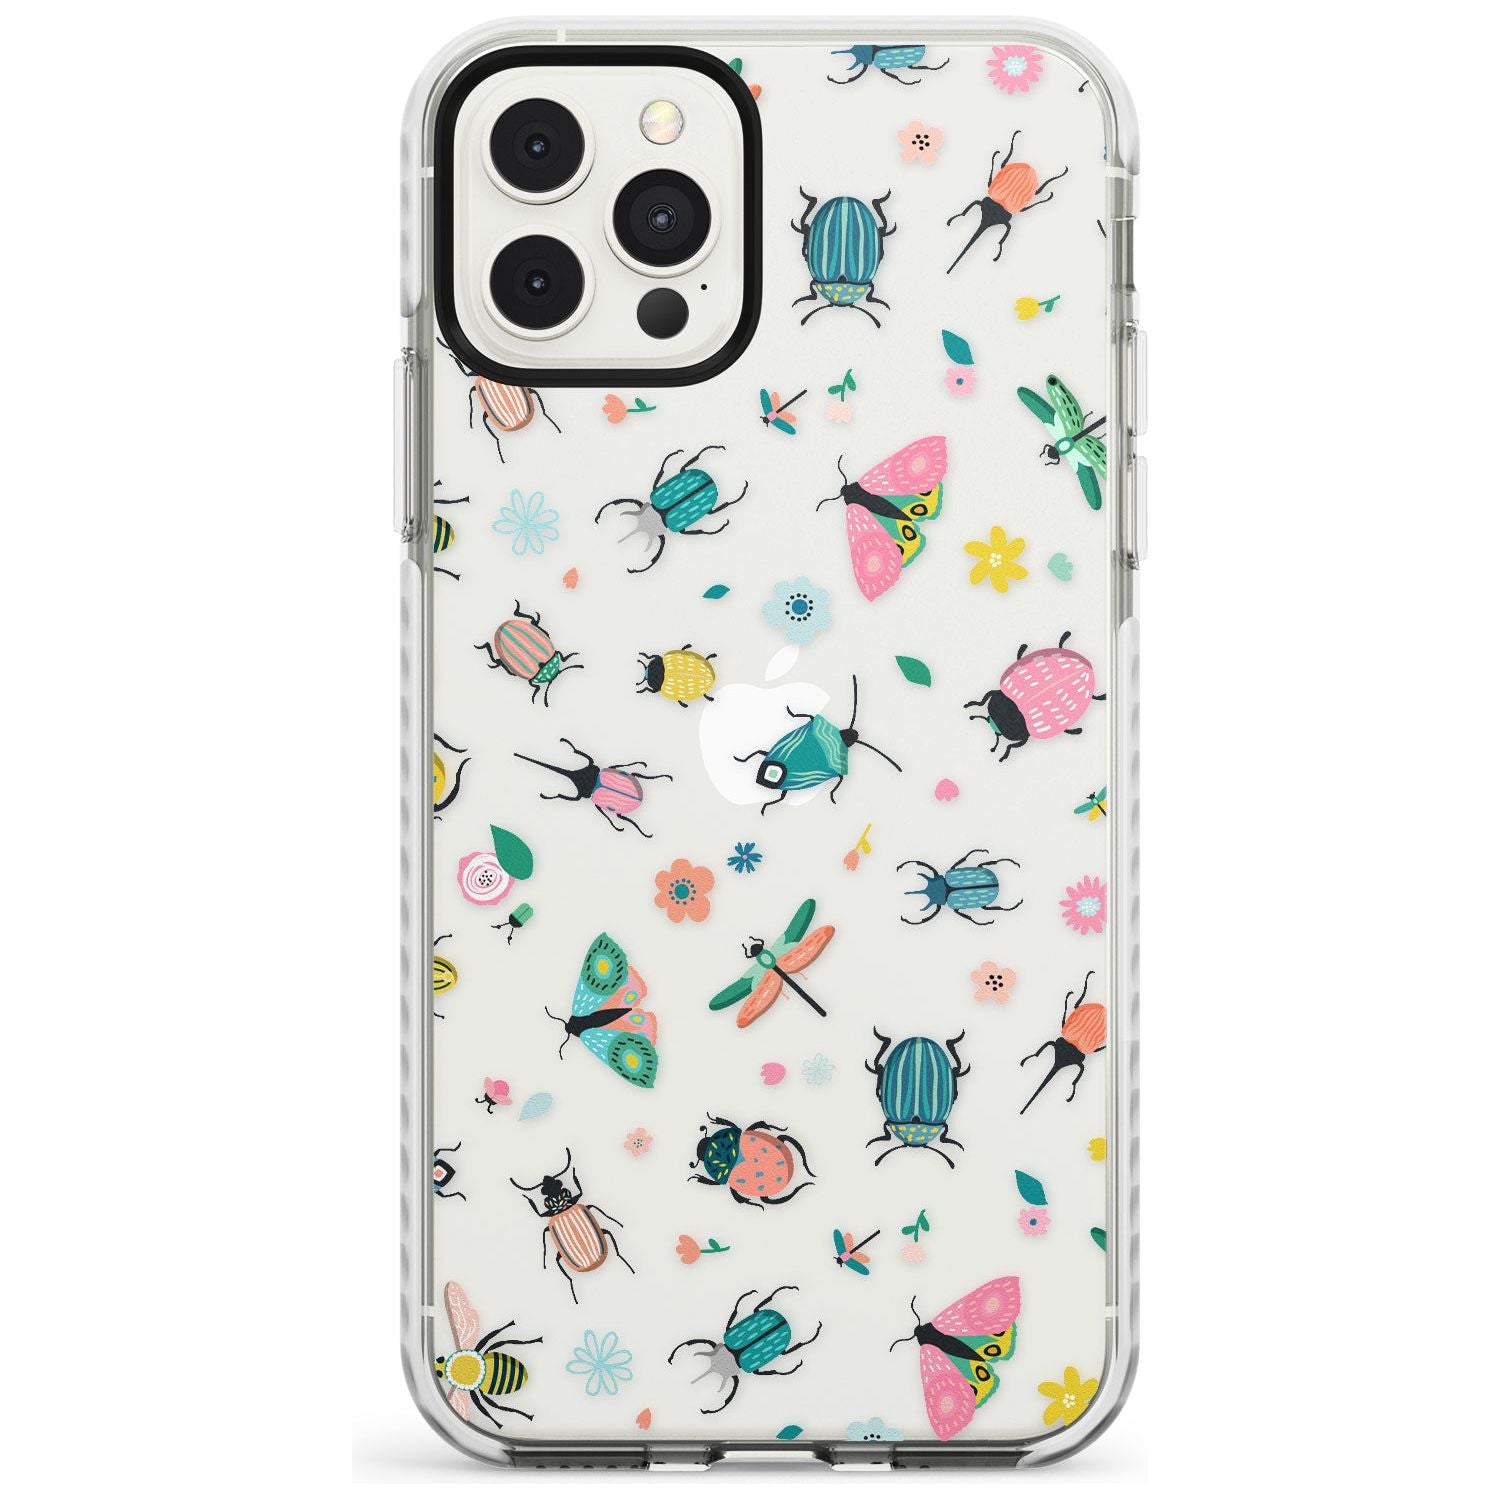 Spring Insects Slim TPU Phone Case for iPhone 11 Pro Max